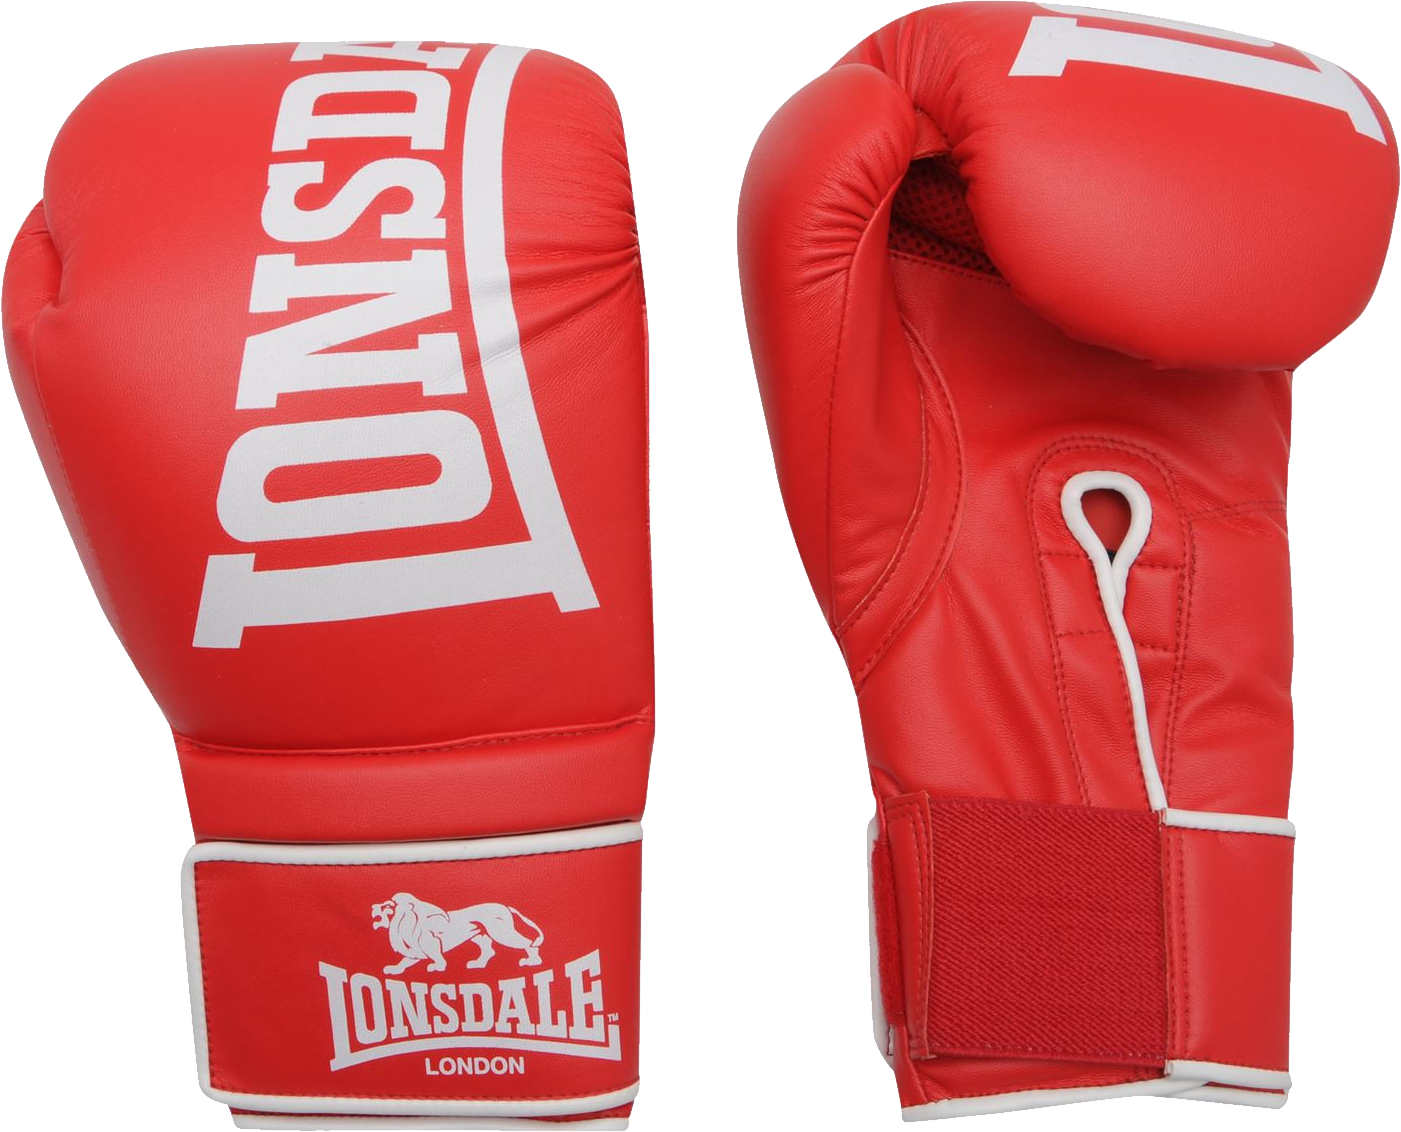 boxing gloves png images are download crazypngm crazy png images download #29294